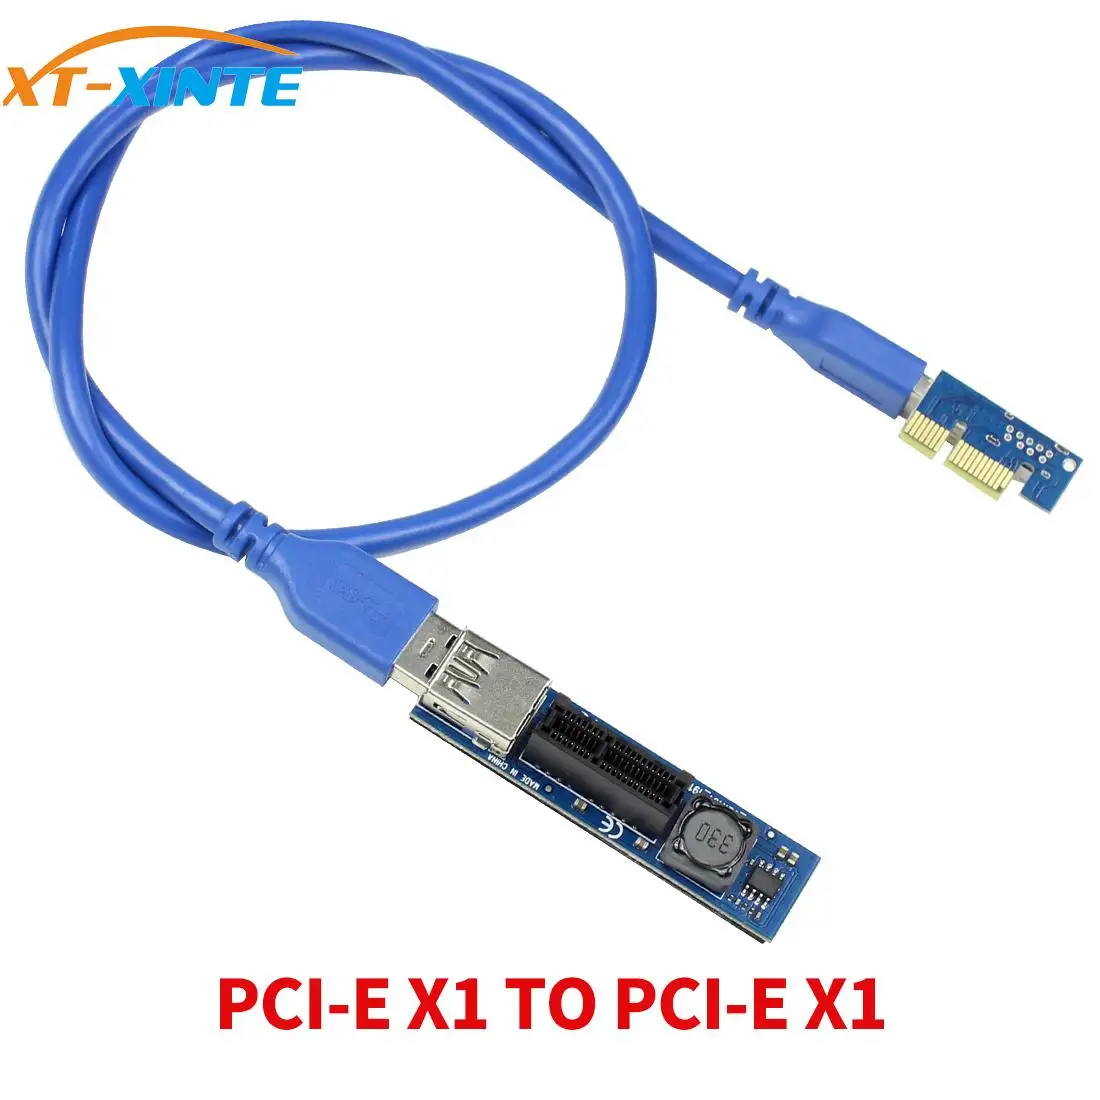 

PCI-E 1X to X1 Extender Adapter USB 3.0 Cable SATA Power PCI Express Extender for PC Motherboard PCIE X1 Slot Riser Add On Card